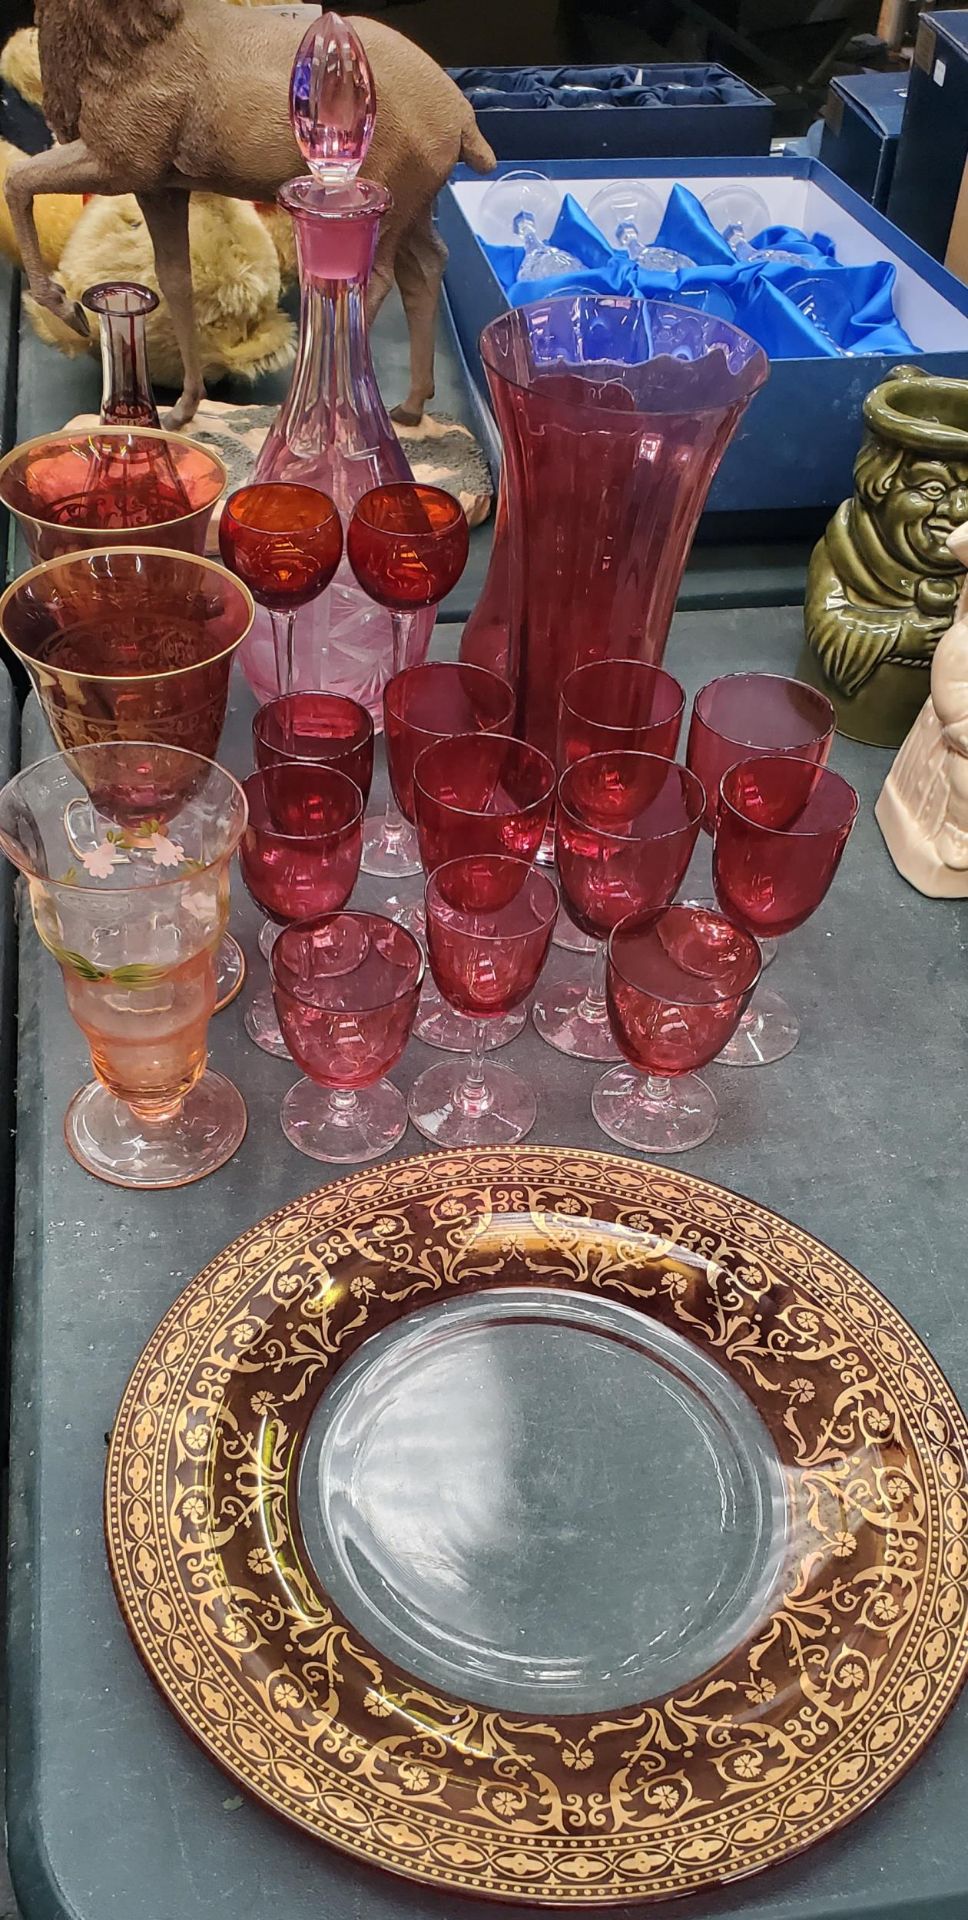 A QUANTITY OF VINTAGE CRANBERRY GLASS TO INCLUDE DECANTERS, VASES, WINE, SHERRY PORT GLASSES, ETC